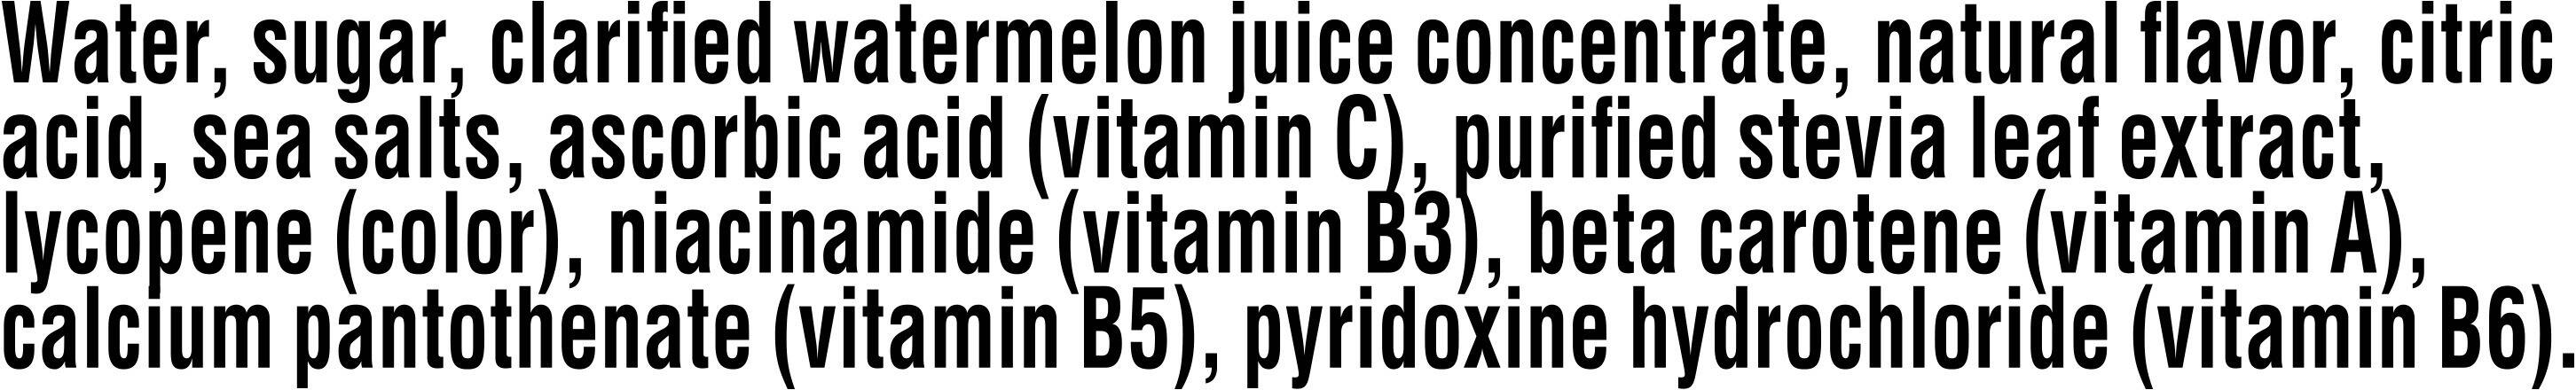 Image describing nutrition information for product Gatorade Bolt24 Mixed Berry